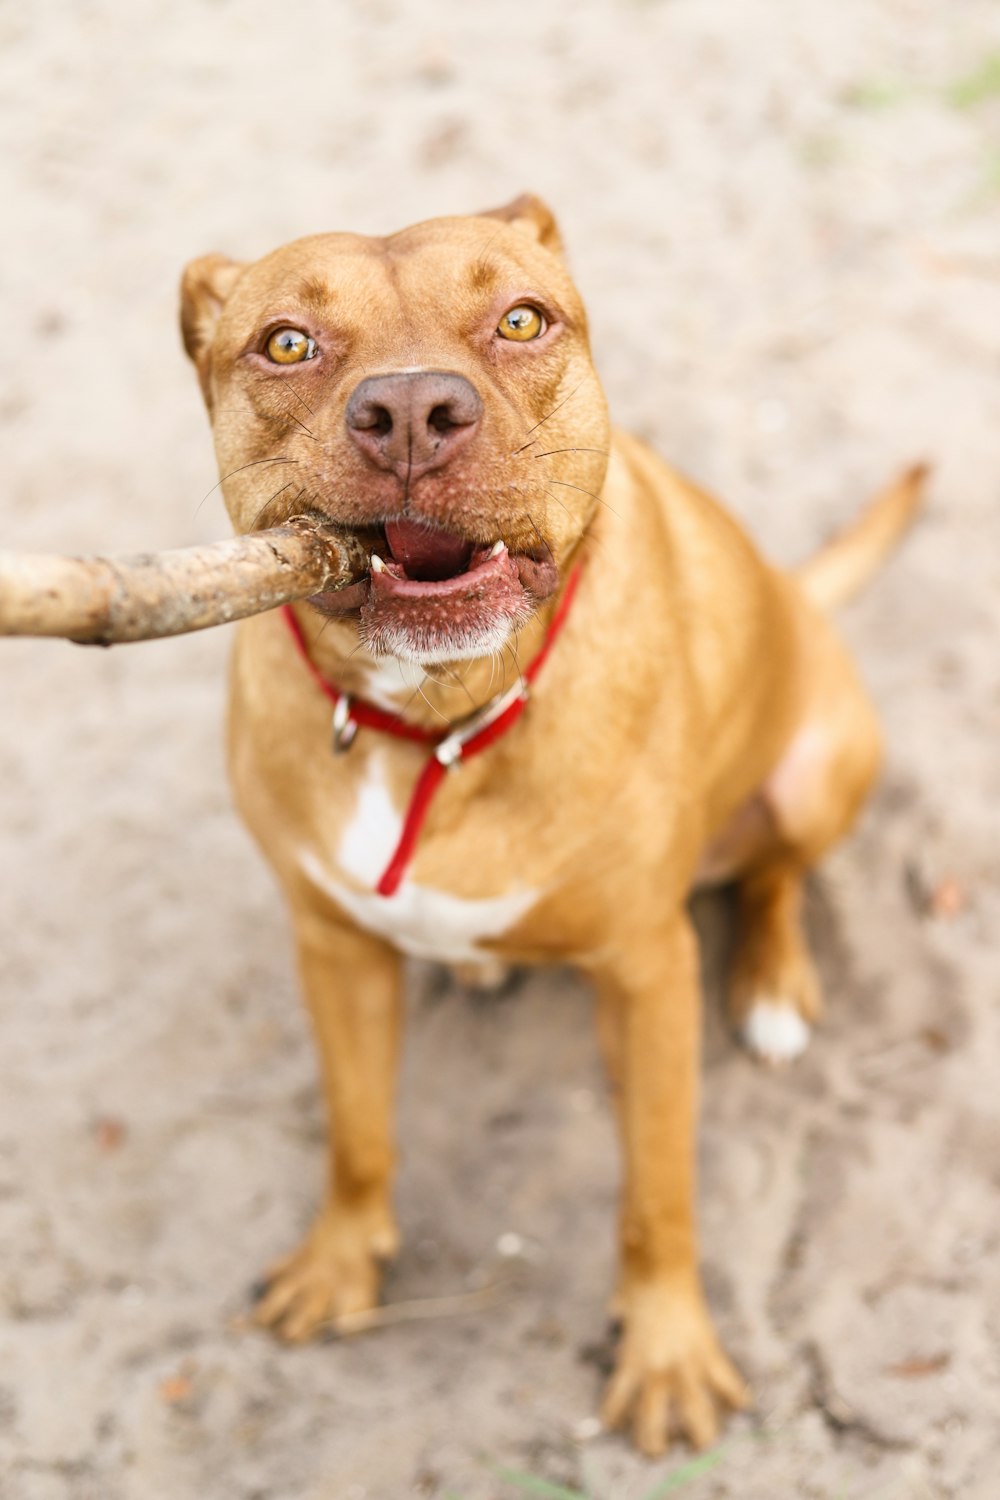 brown and white american pitbull terrier mix puppy photo - Free Dog Image on Unsplash